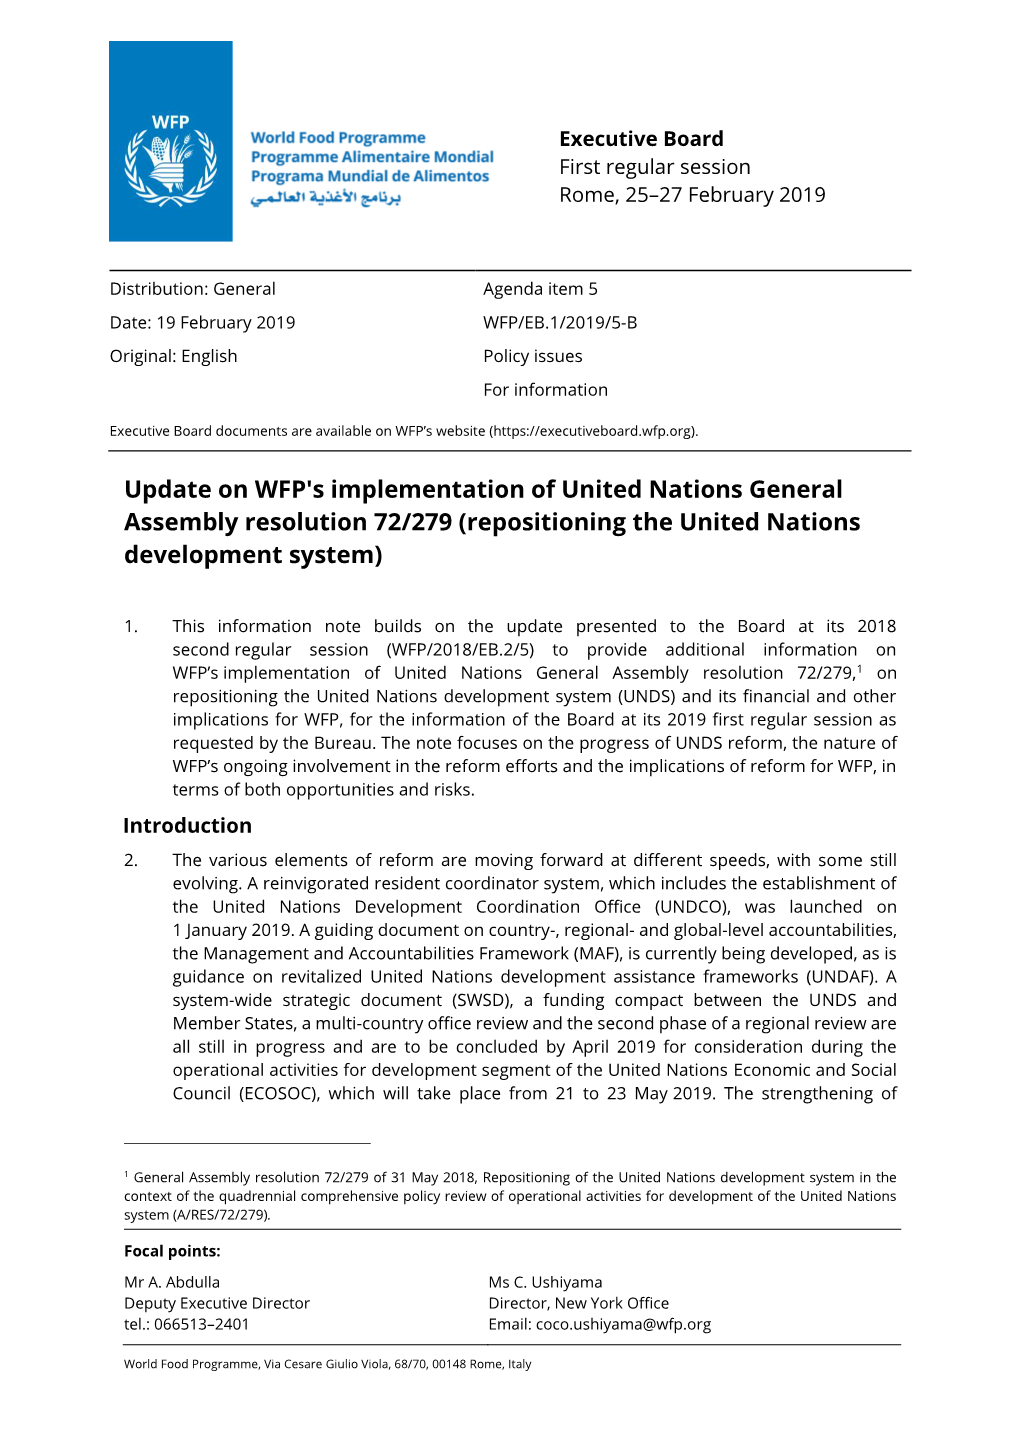 Repositioning the United Nations Development System)